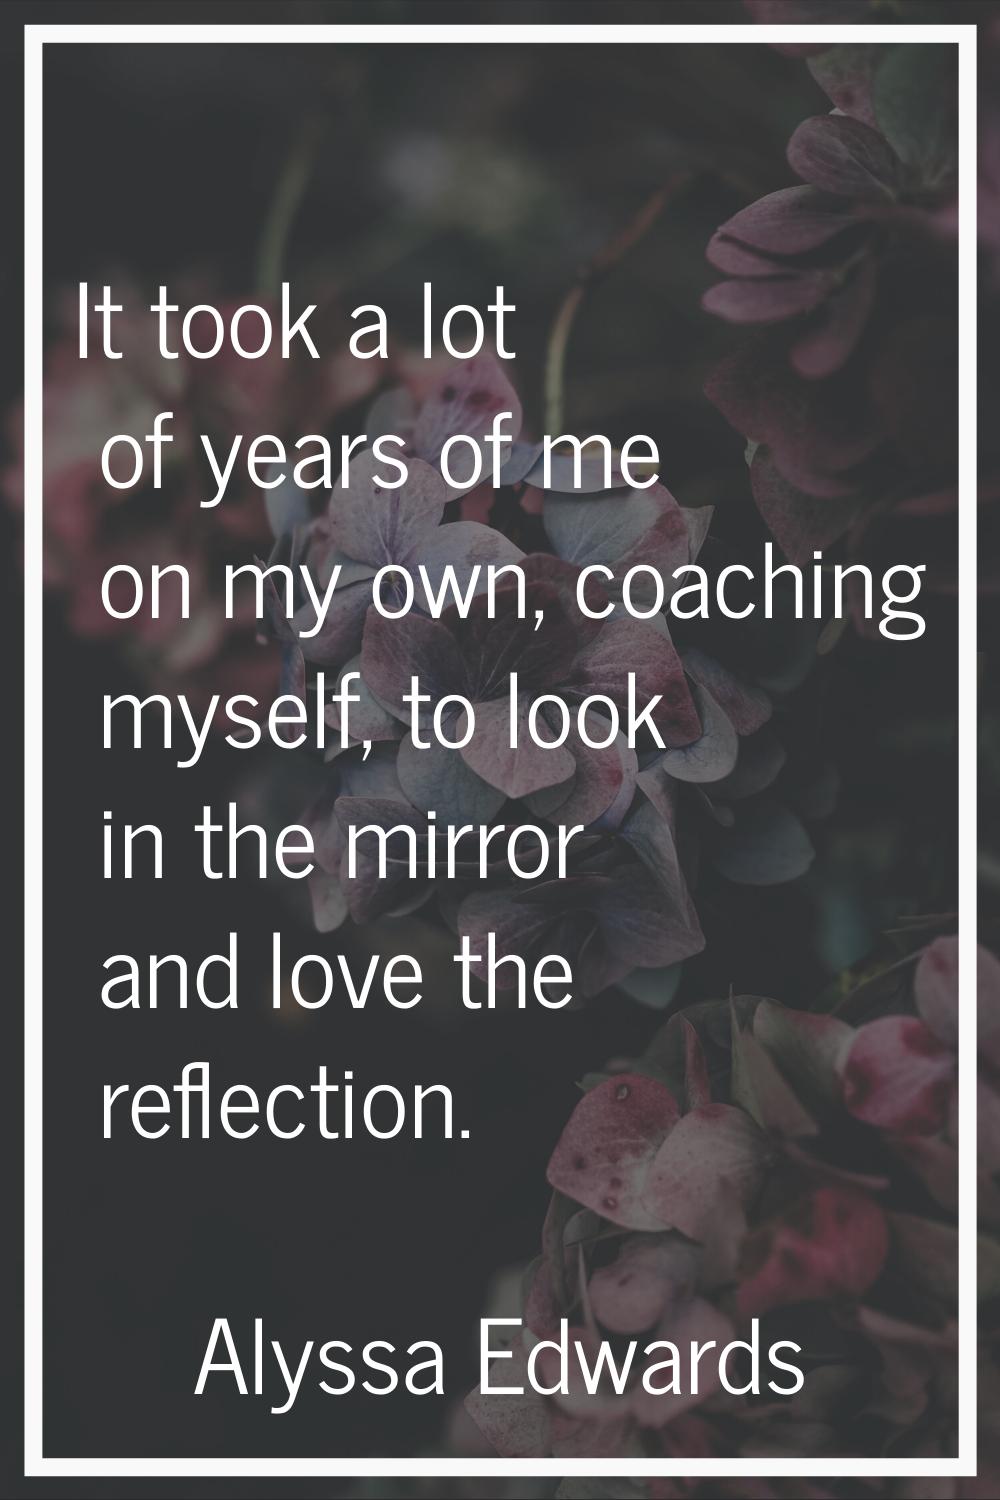 It took a lot of years of me on my own, coaching myself, to look in the mirror and love the reflect